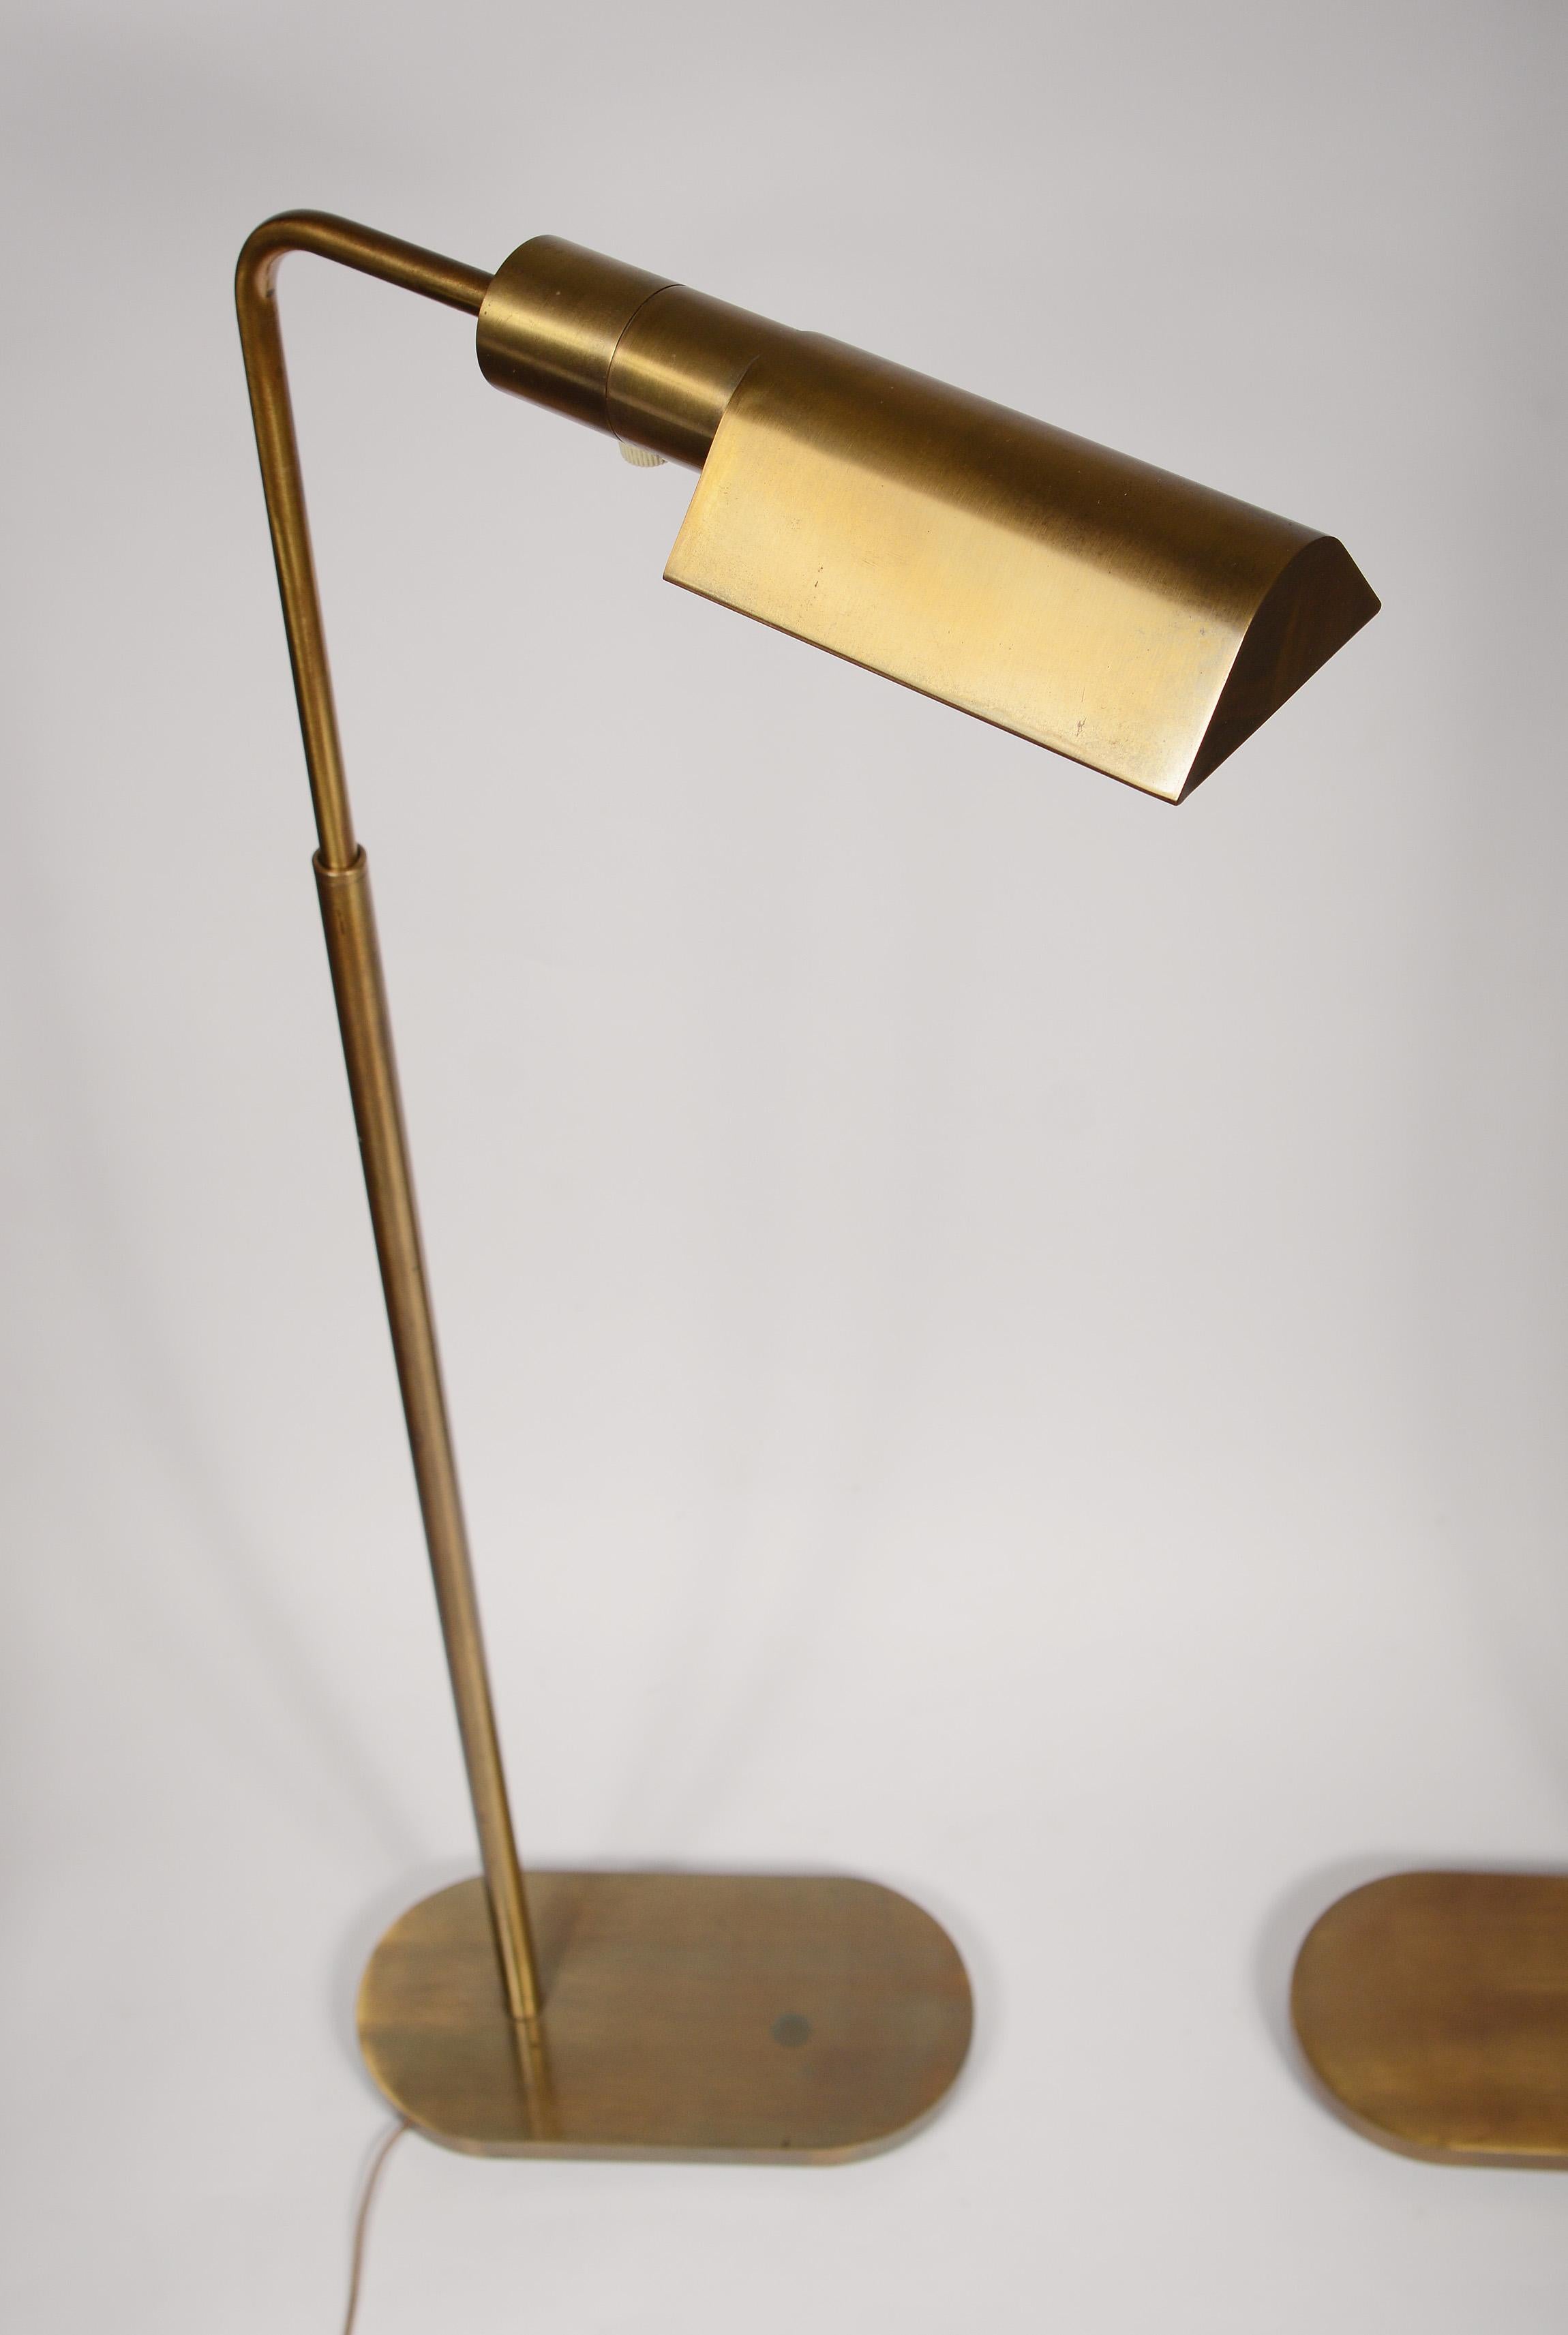 American Pair of Casella Brass Adjustable Reading Lamps